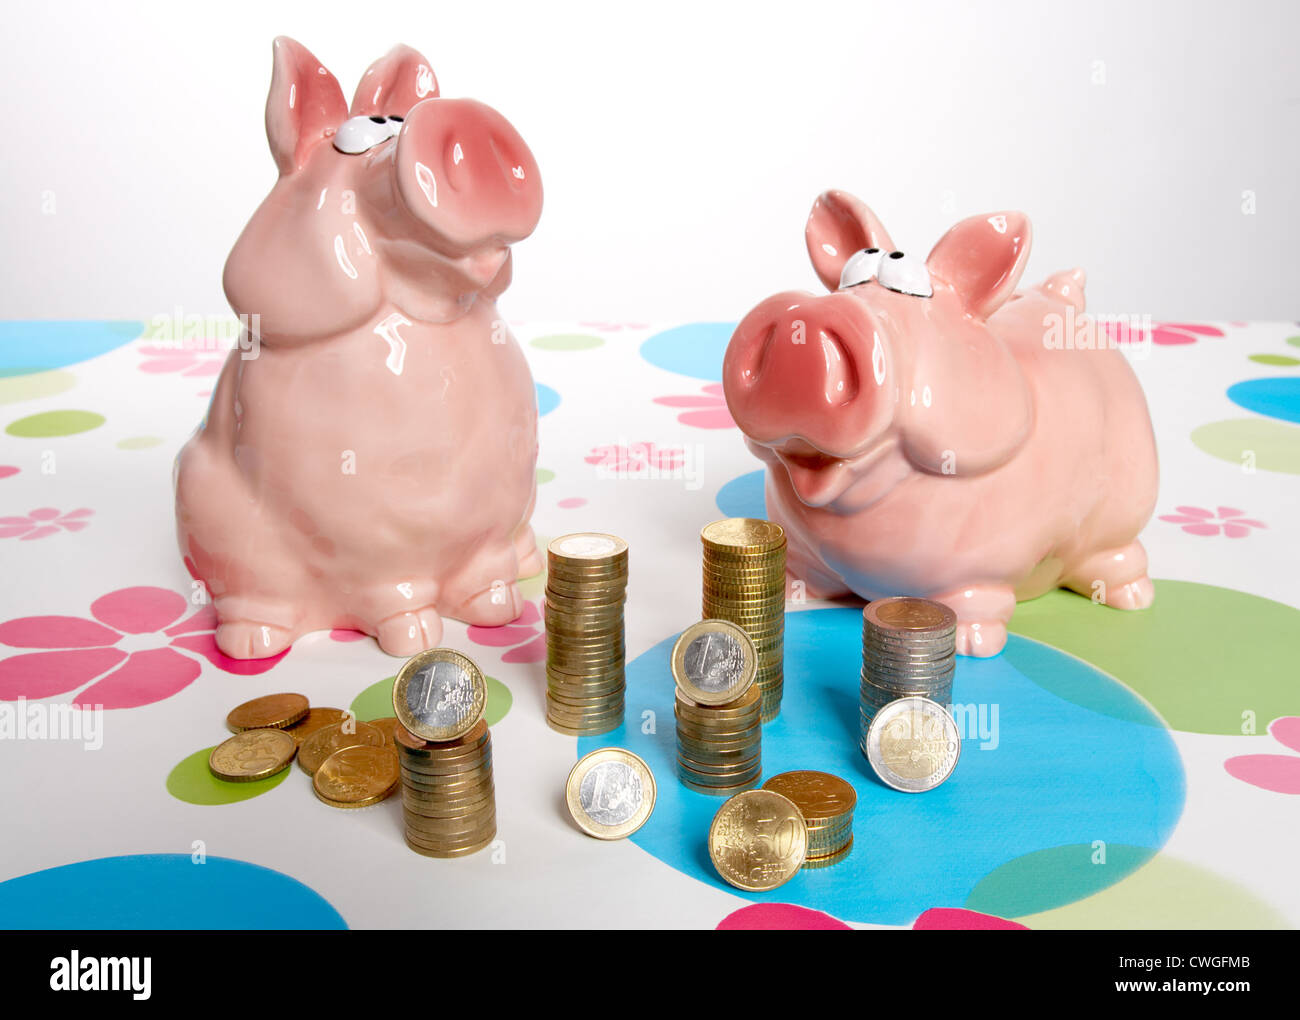 Piggy banks with Muenzstapeln on patterned background Stock Photo